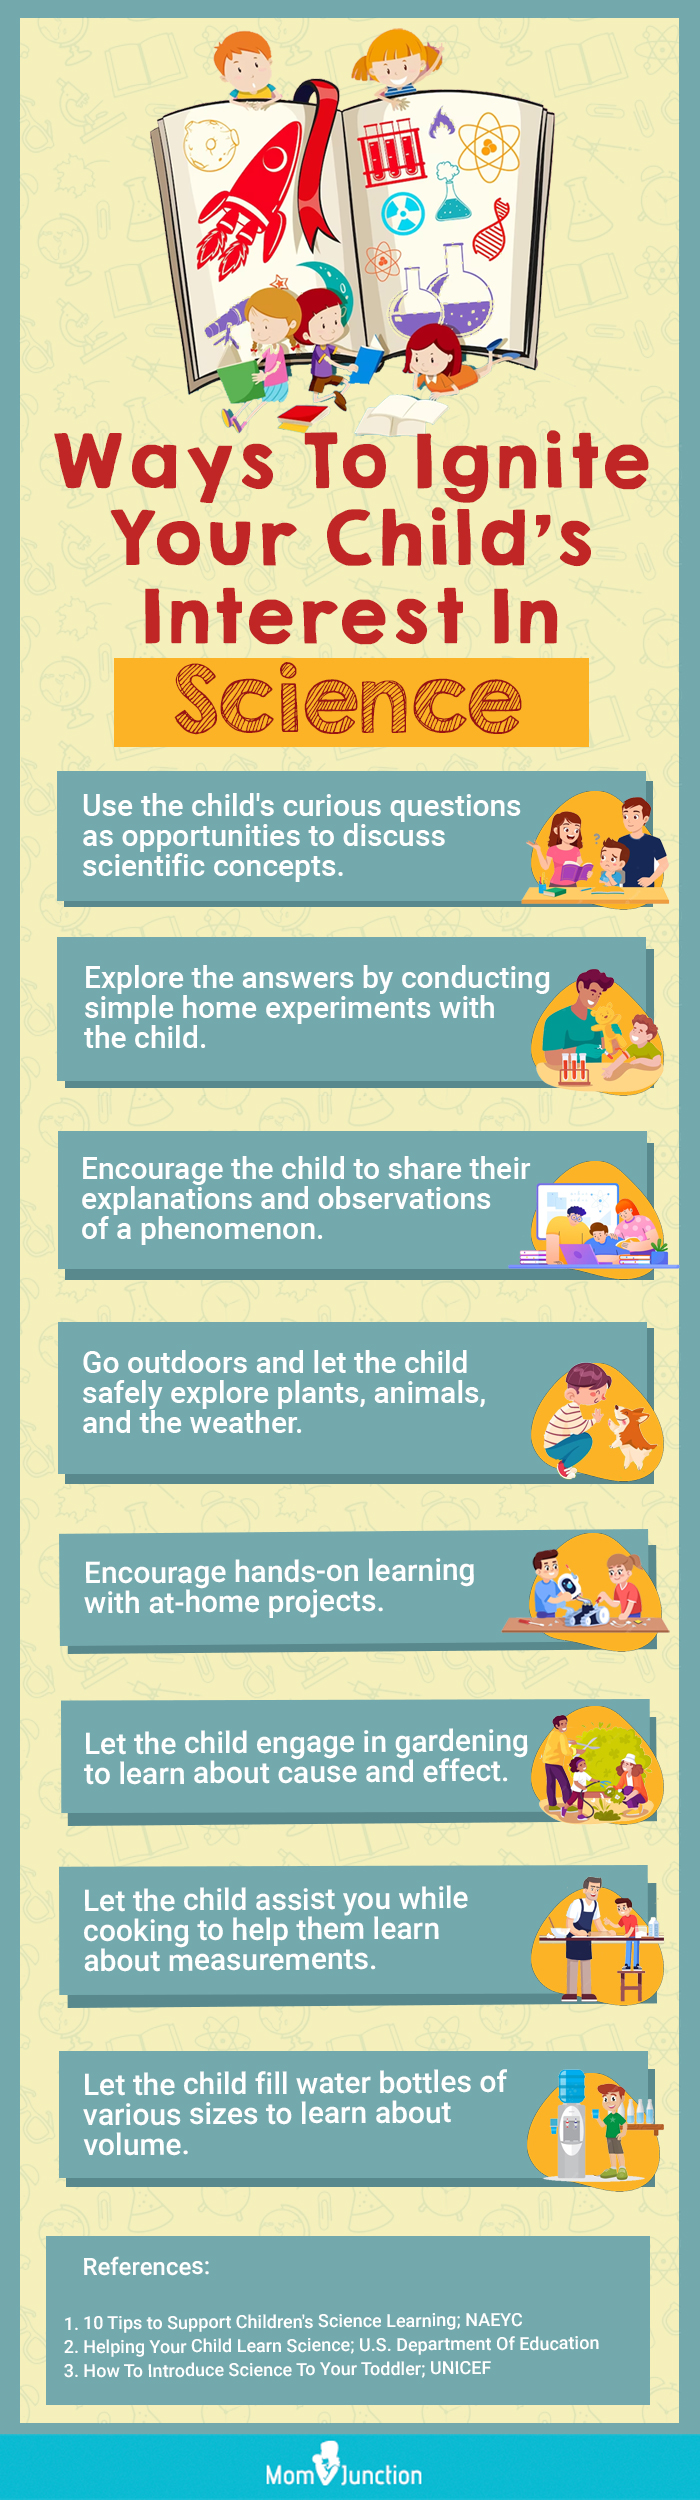 Ways To Ignite Your Child’s Interest In Science (infographic)